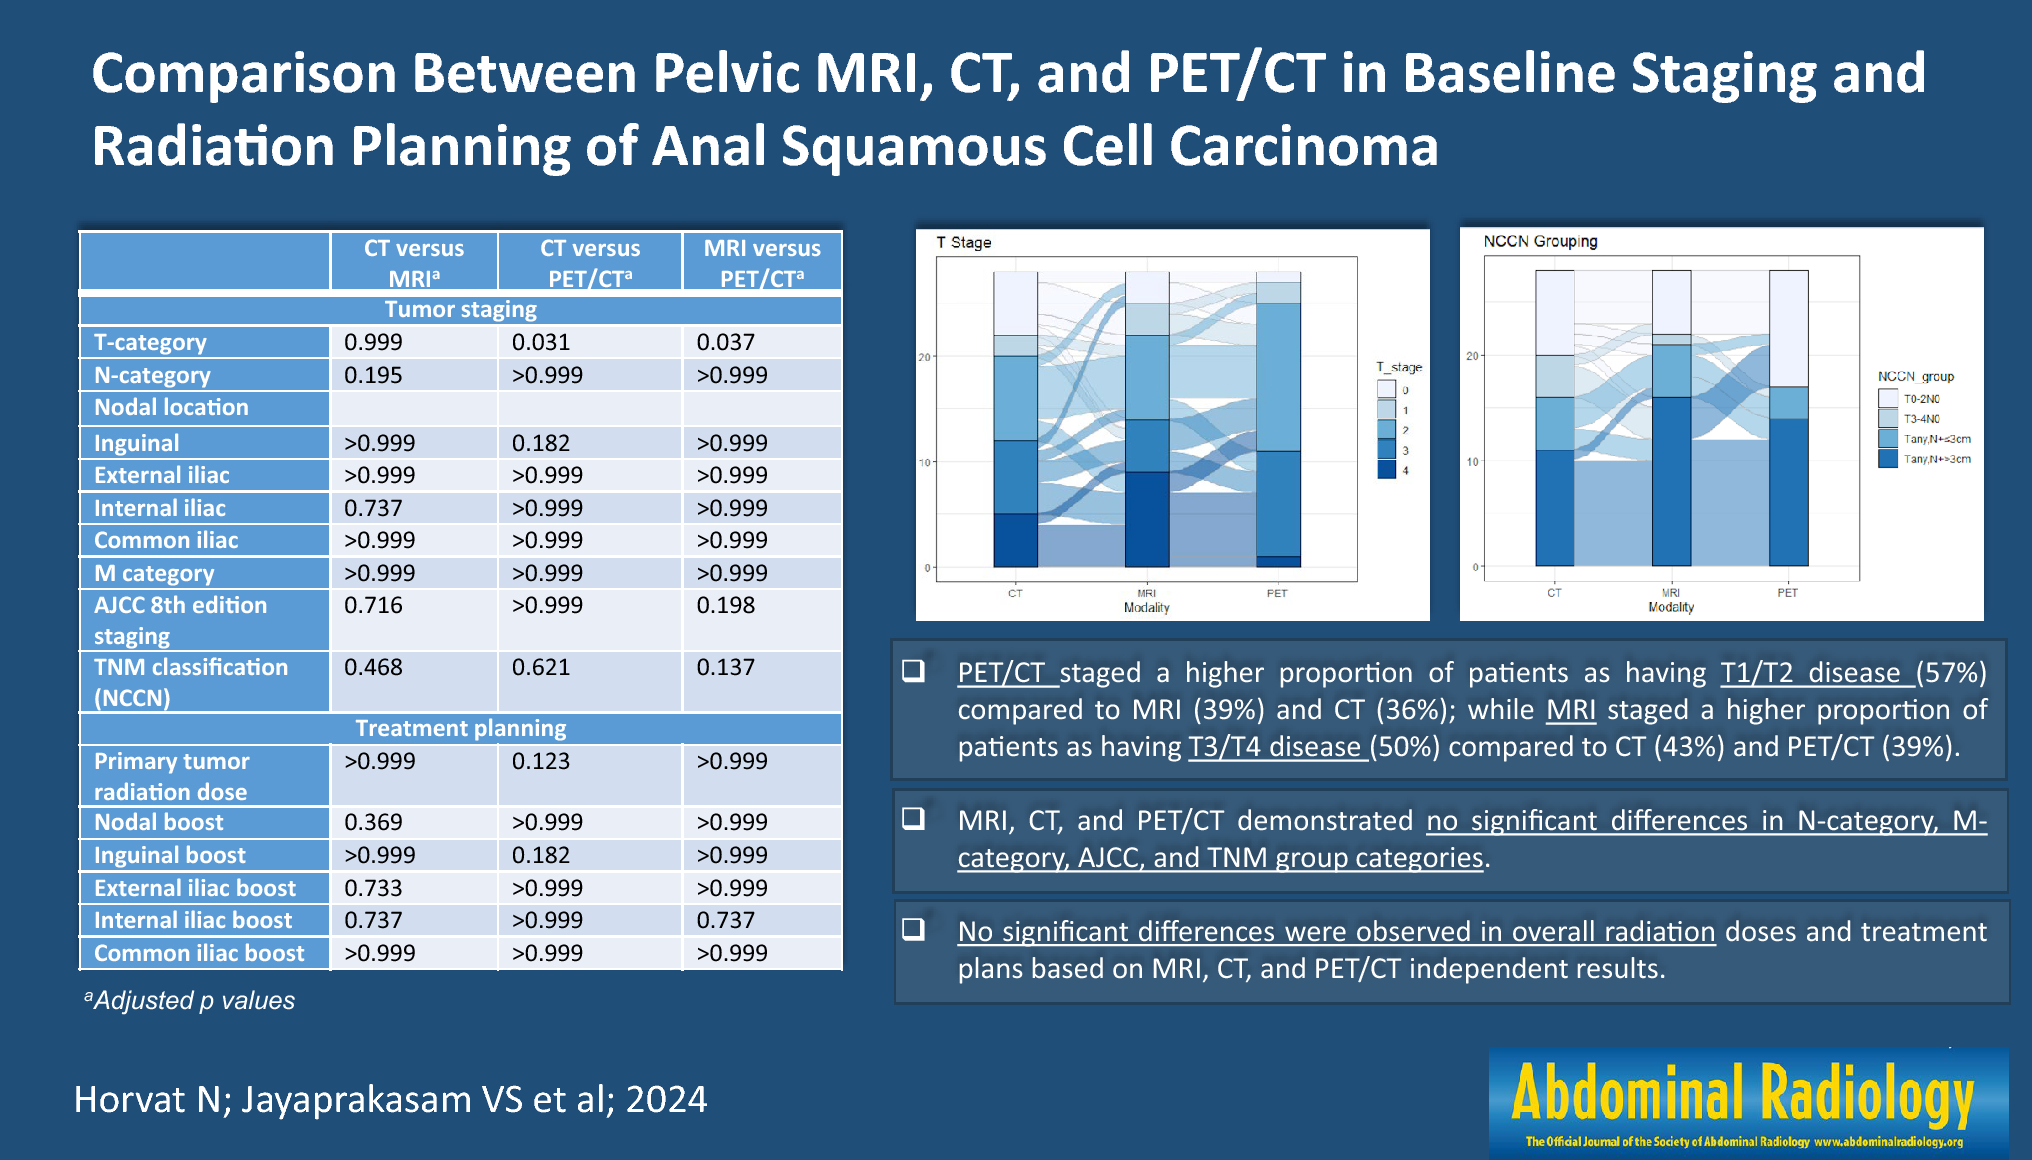 Comparison between pelvic MRI, CT, and PET/CT in baseline staging and radiation planning of anal squamous cell carcinoma